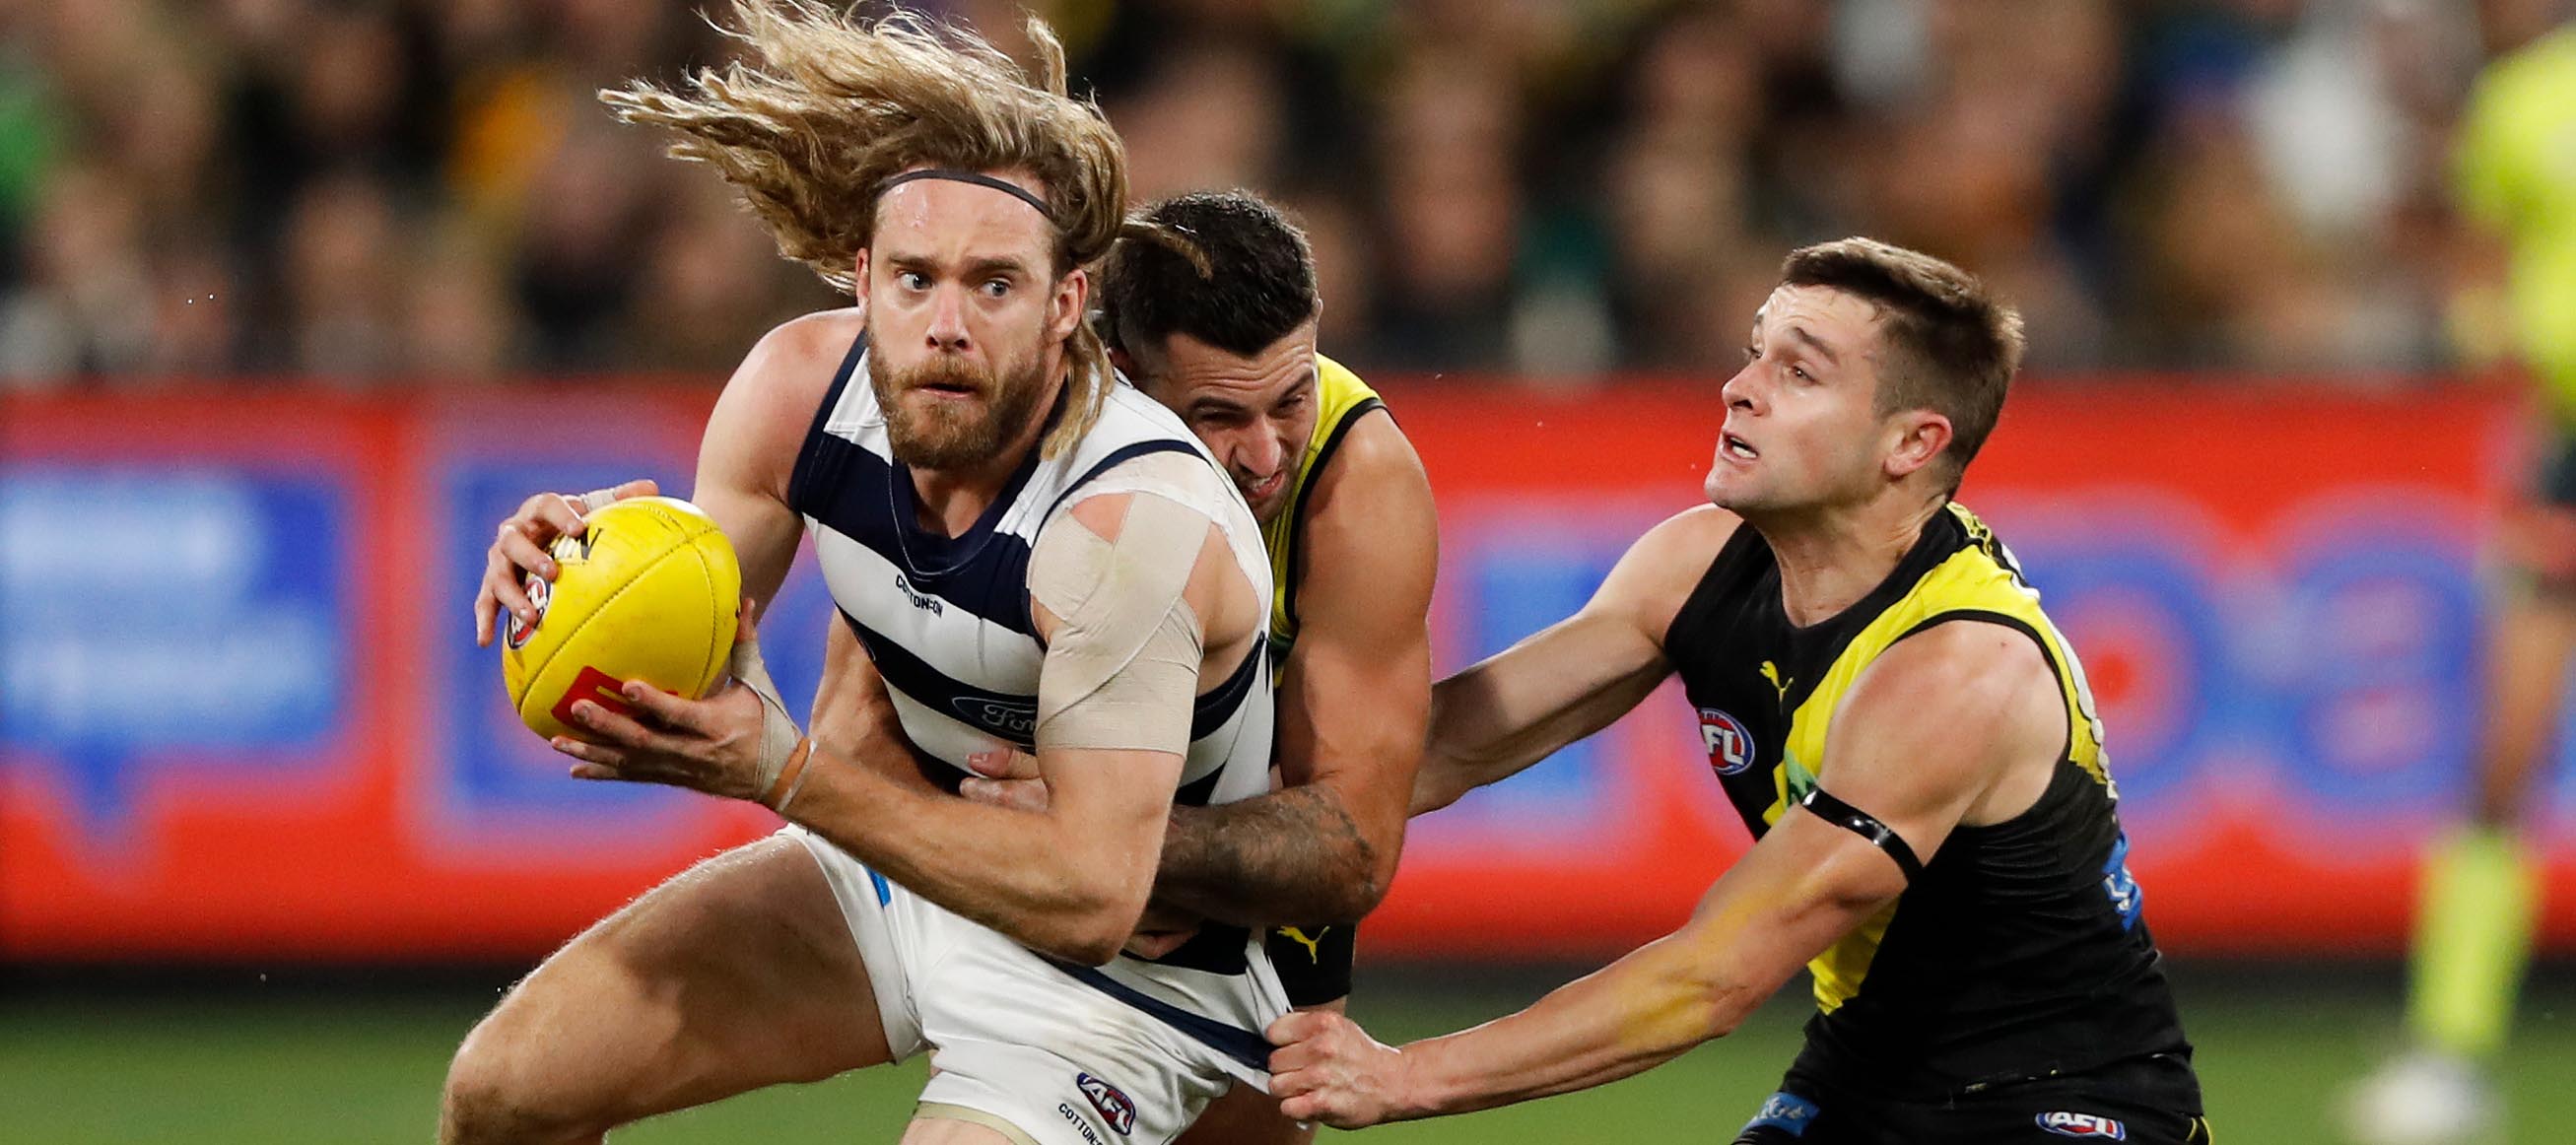 Afl betting odds round 17 to nearest does kraken charge to withdraw crypto